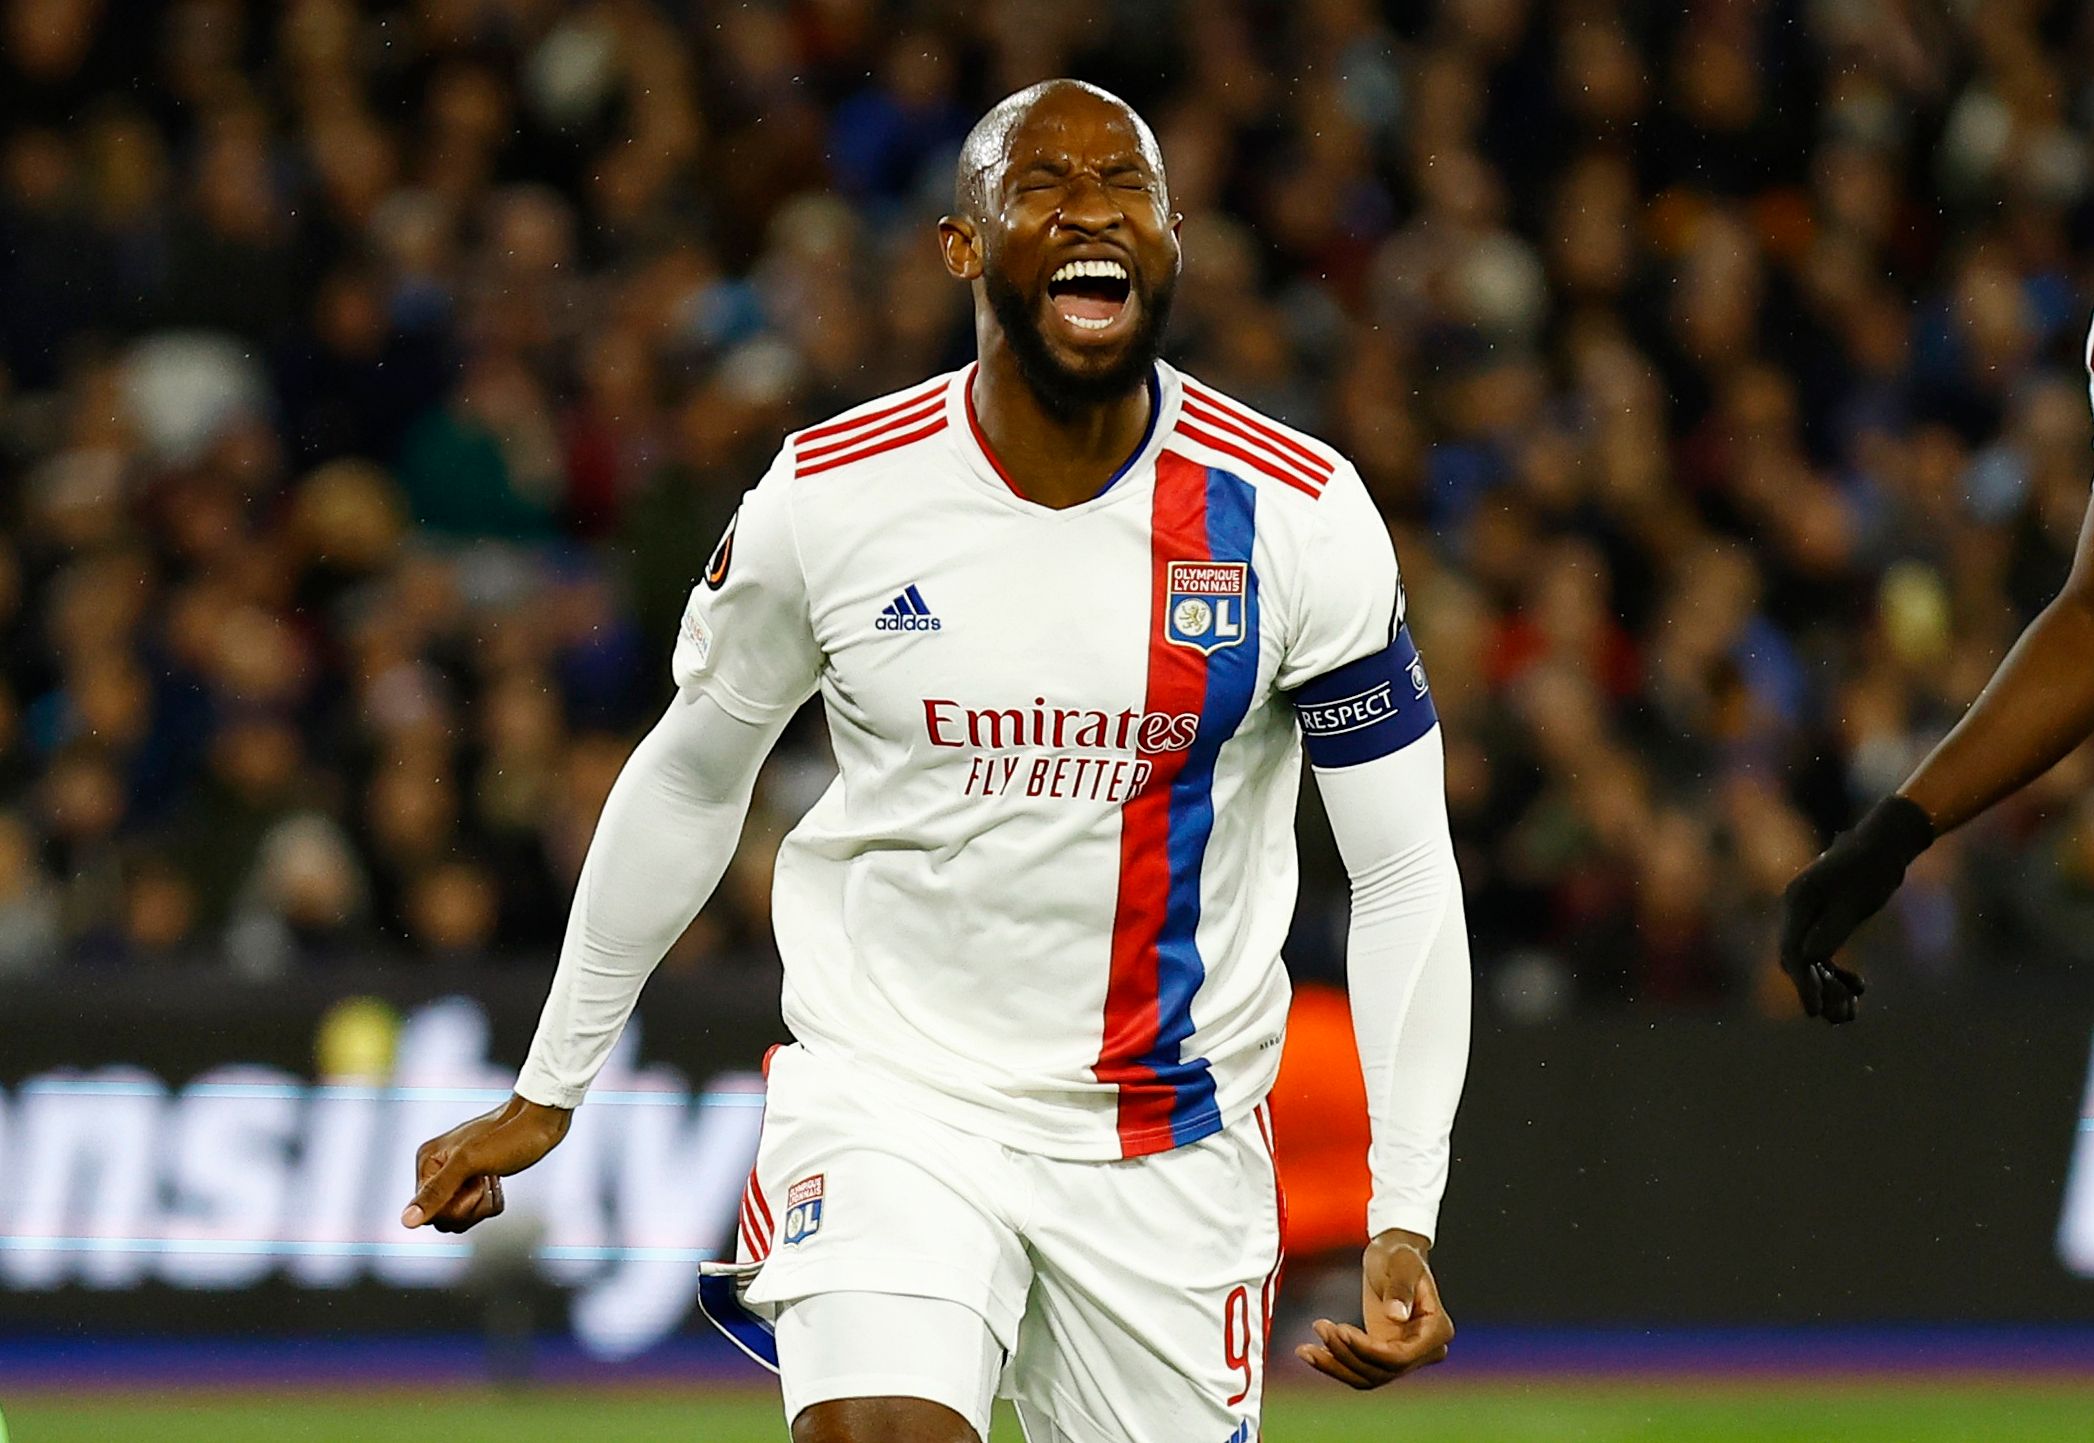 Soccer Football - Europa League - Quarter Final - First Leg - West Ham United v Olympique Lyonnais - London Stadium, London, Britain - April 7, 2022  Olympique Lyonnais' Moussa Dembele reacts after missing a chance to score Action Images via Reuters/Andrew Boyers